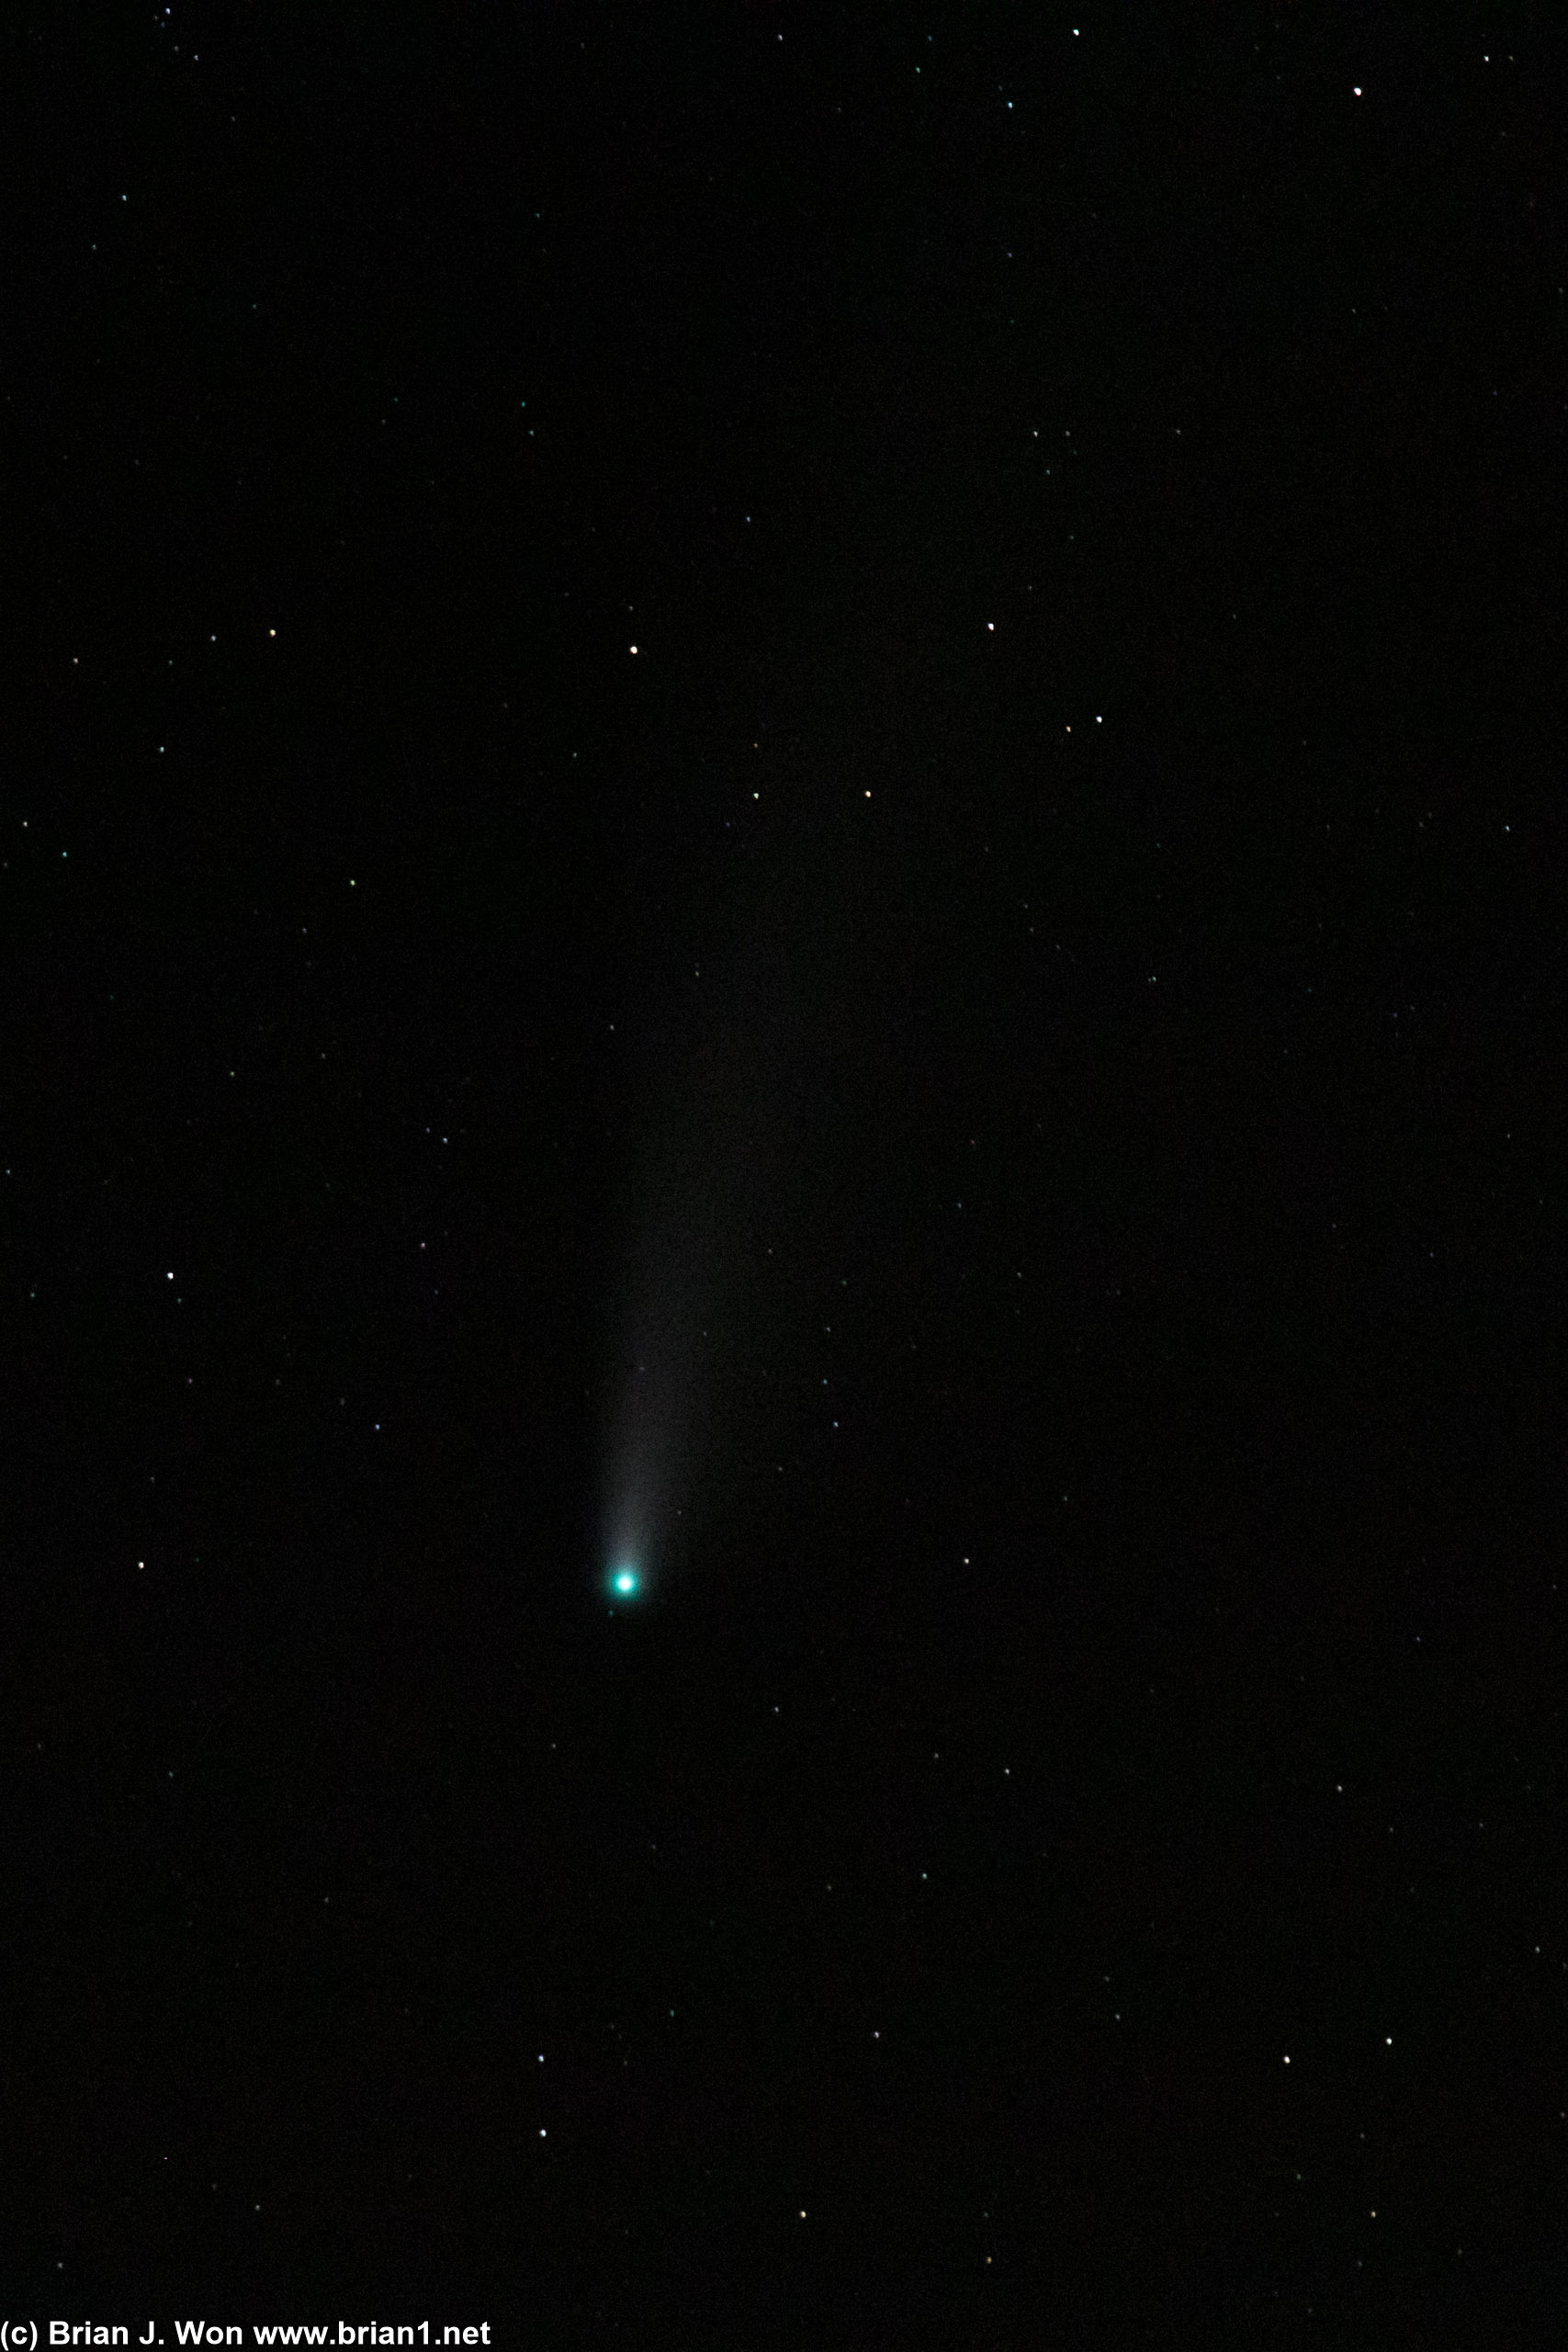 Finally a good shot of Comet NEOWISE's long tail, 2 nights after the last.